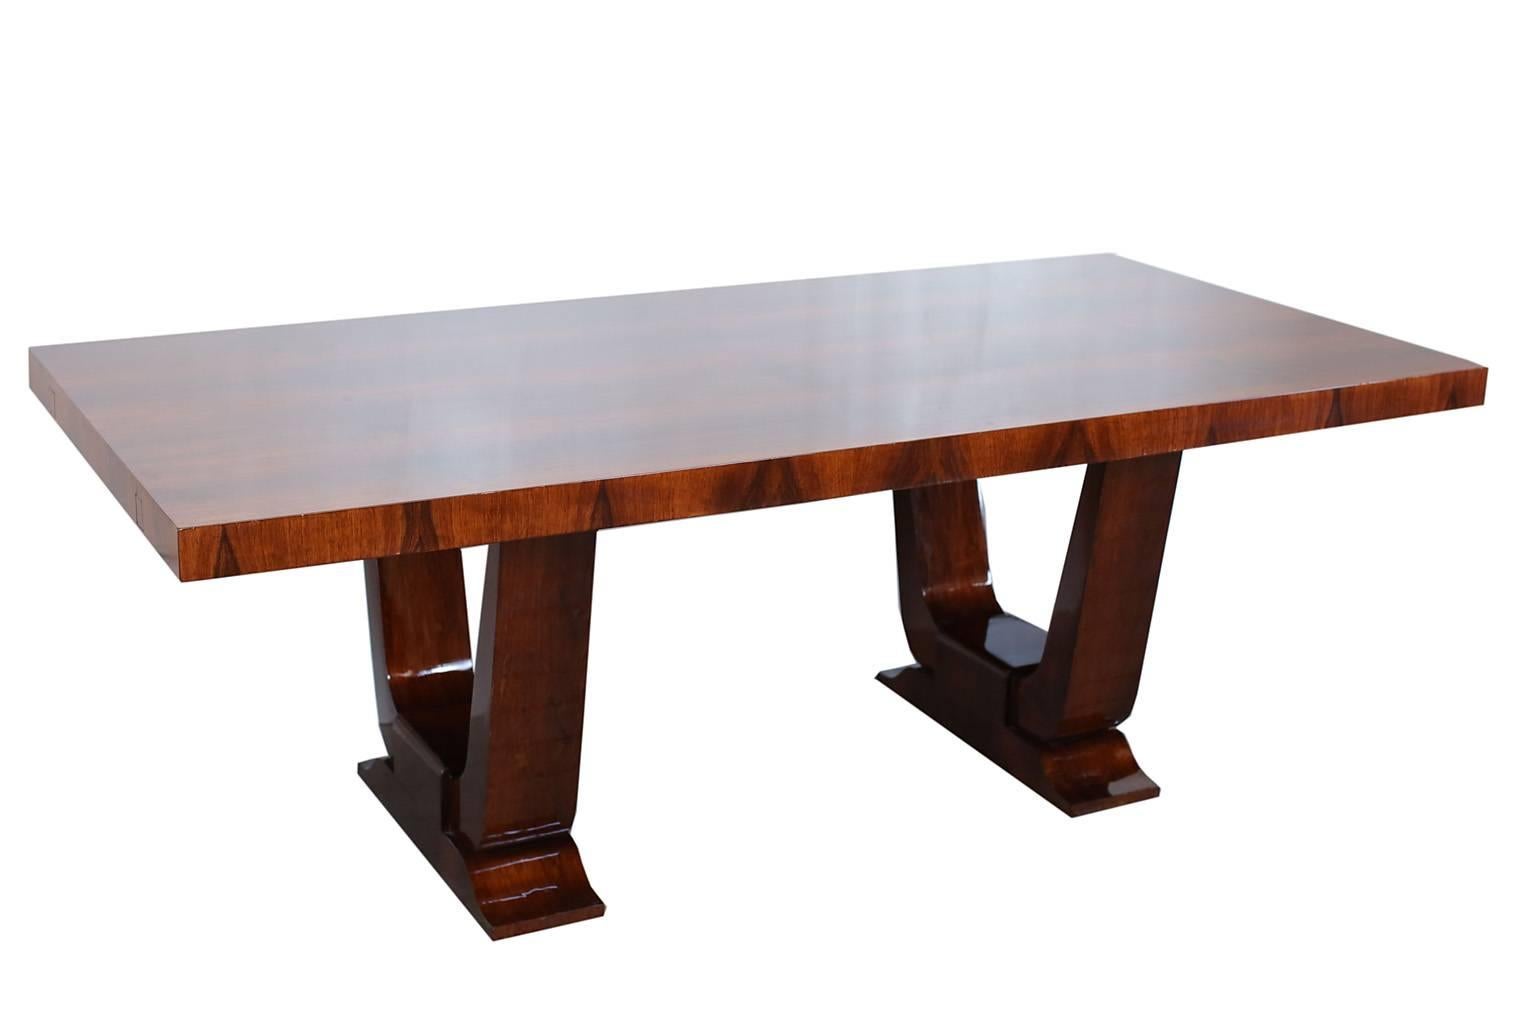 French Art Deco walnut dining table. Includes two tablecloth extensions. Extensions are 20 inches each.